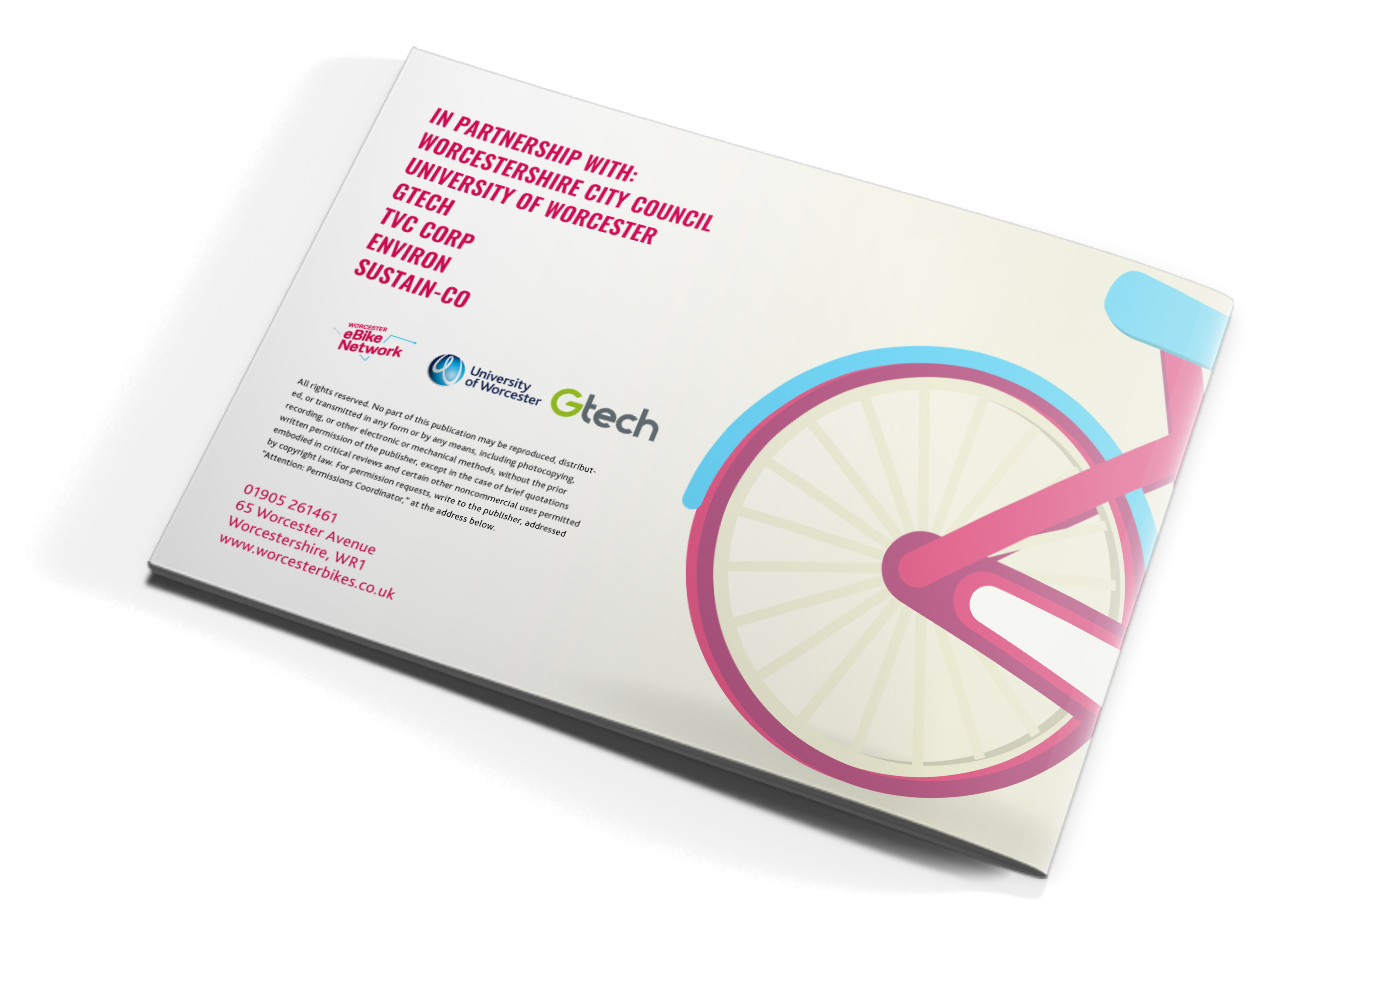 worcester cycle network bikes ebikes Isometric ILLUSTRATION  ebook branding  mobile